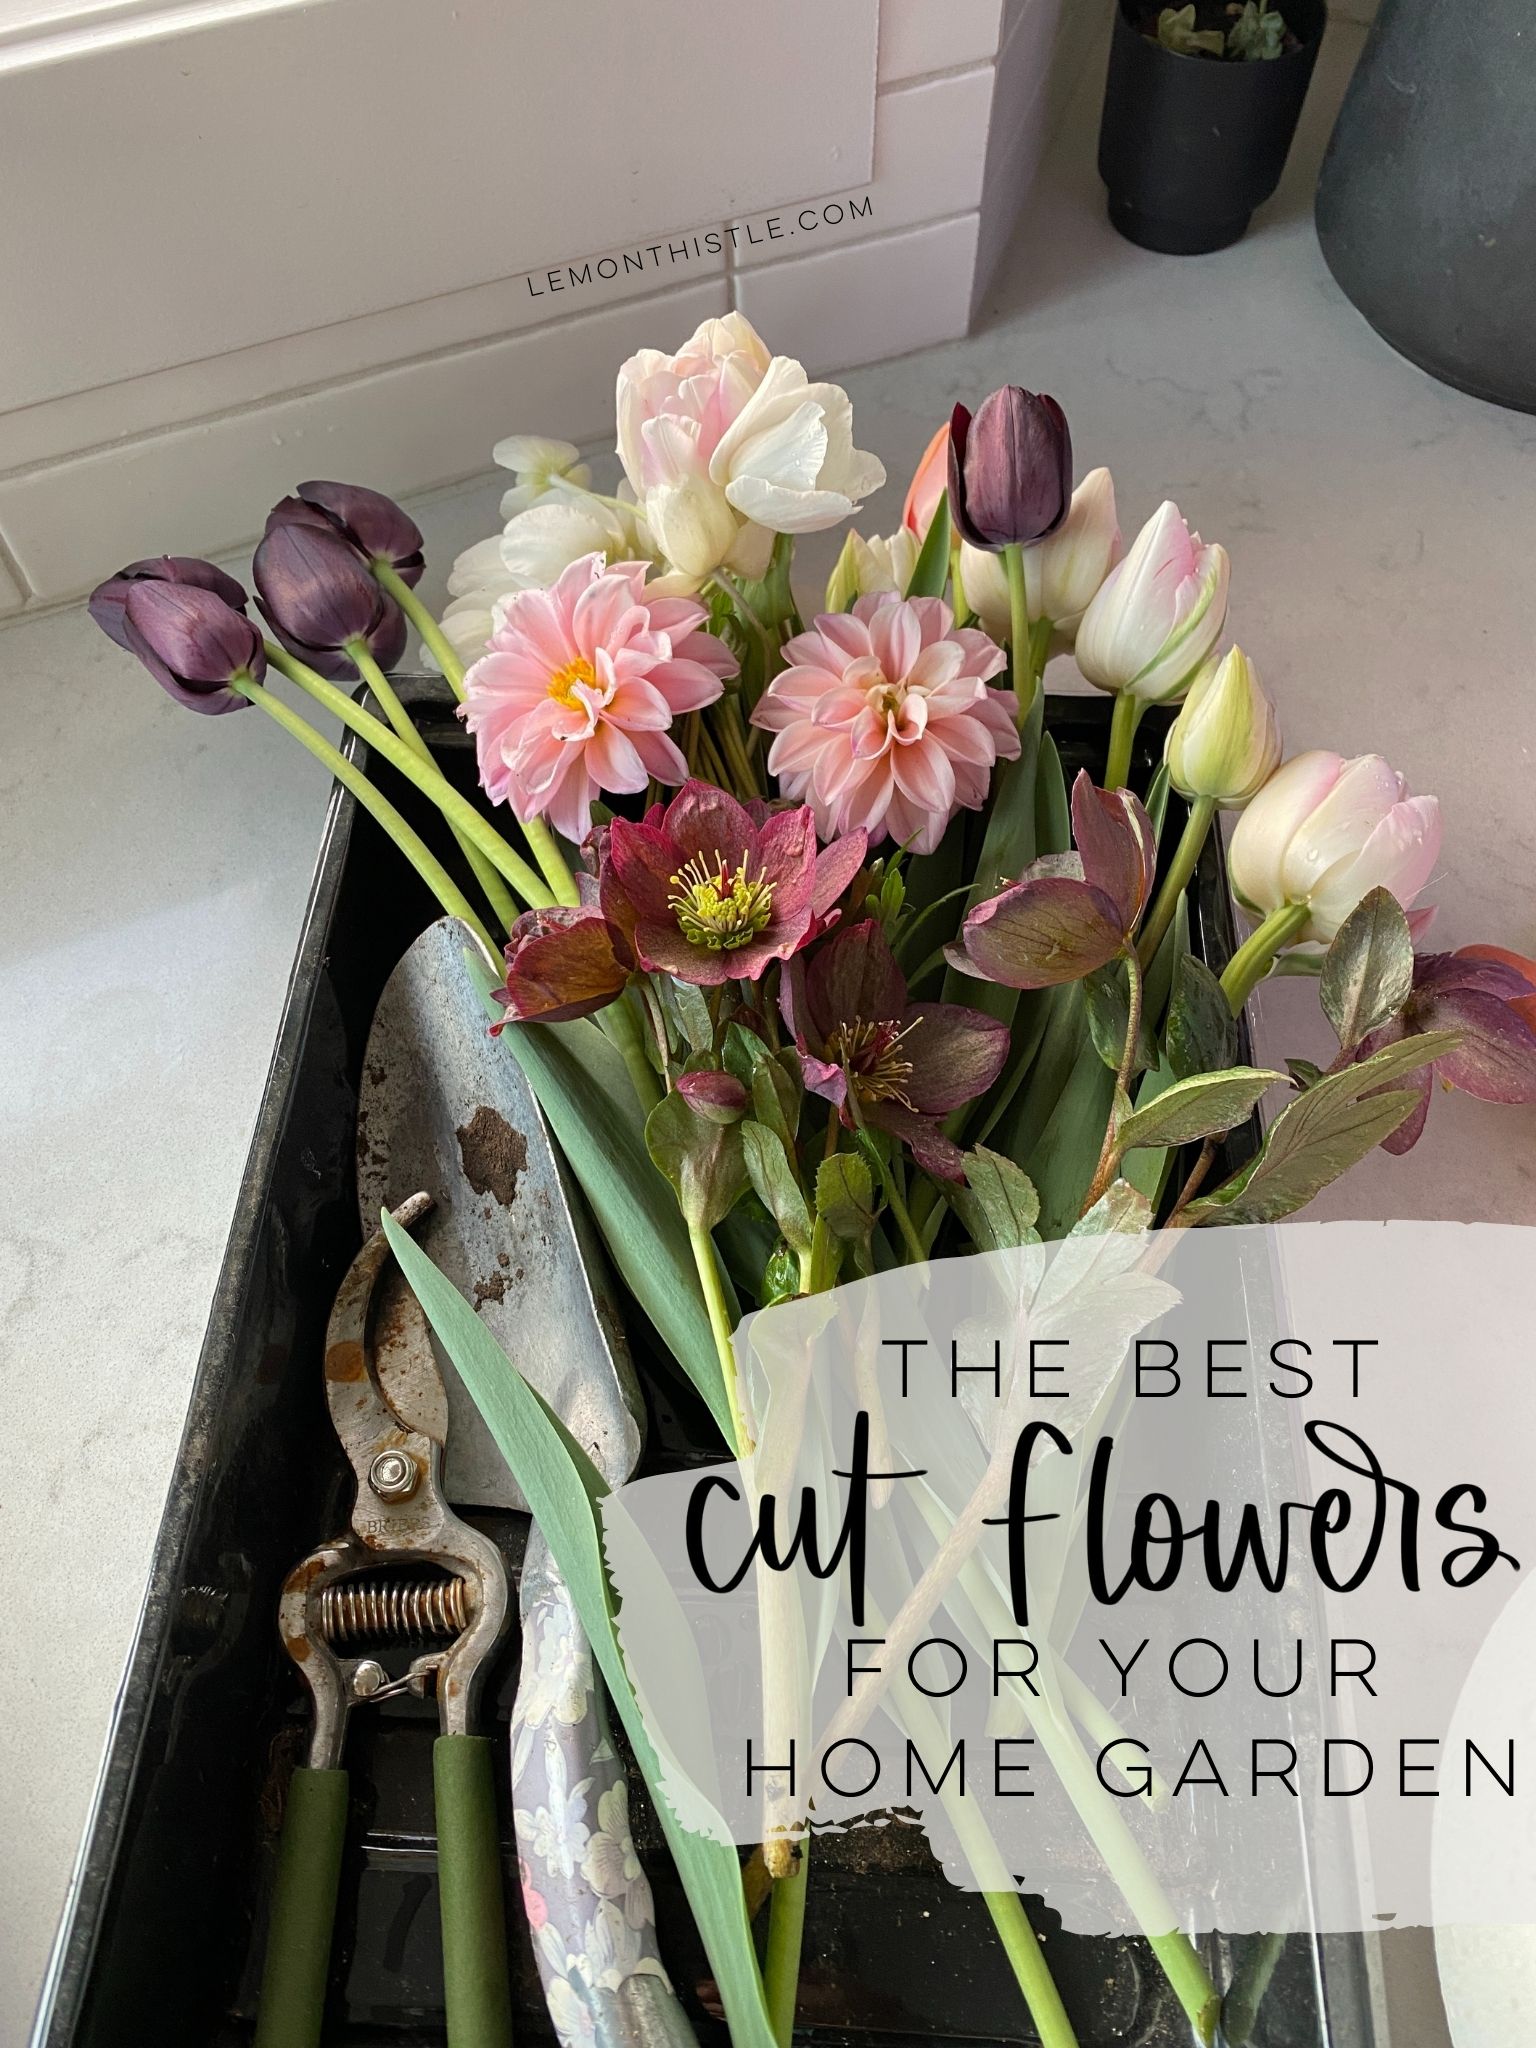 The best cut flowers for your home garden